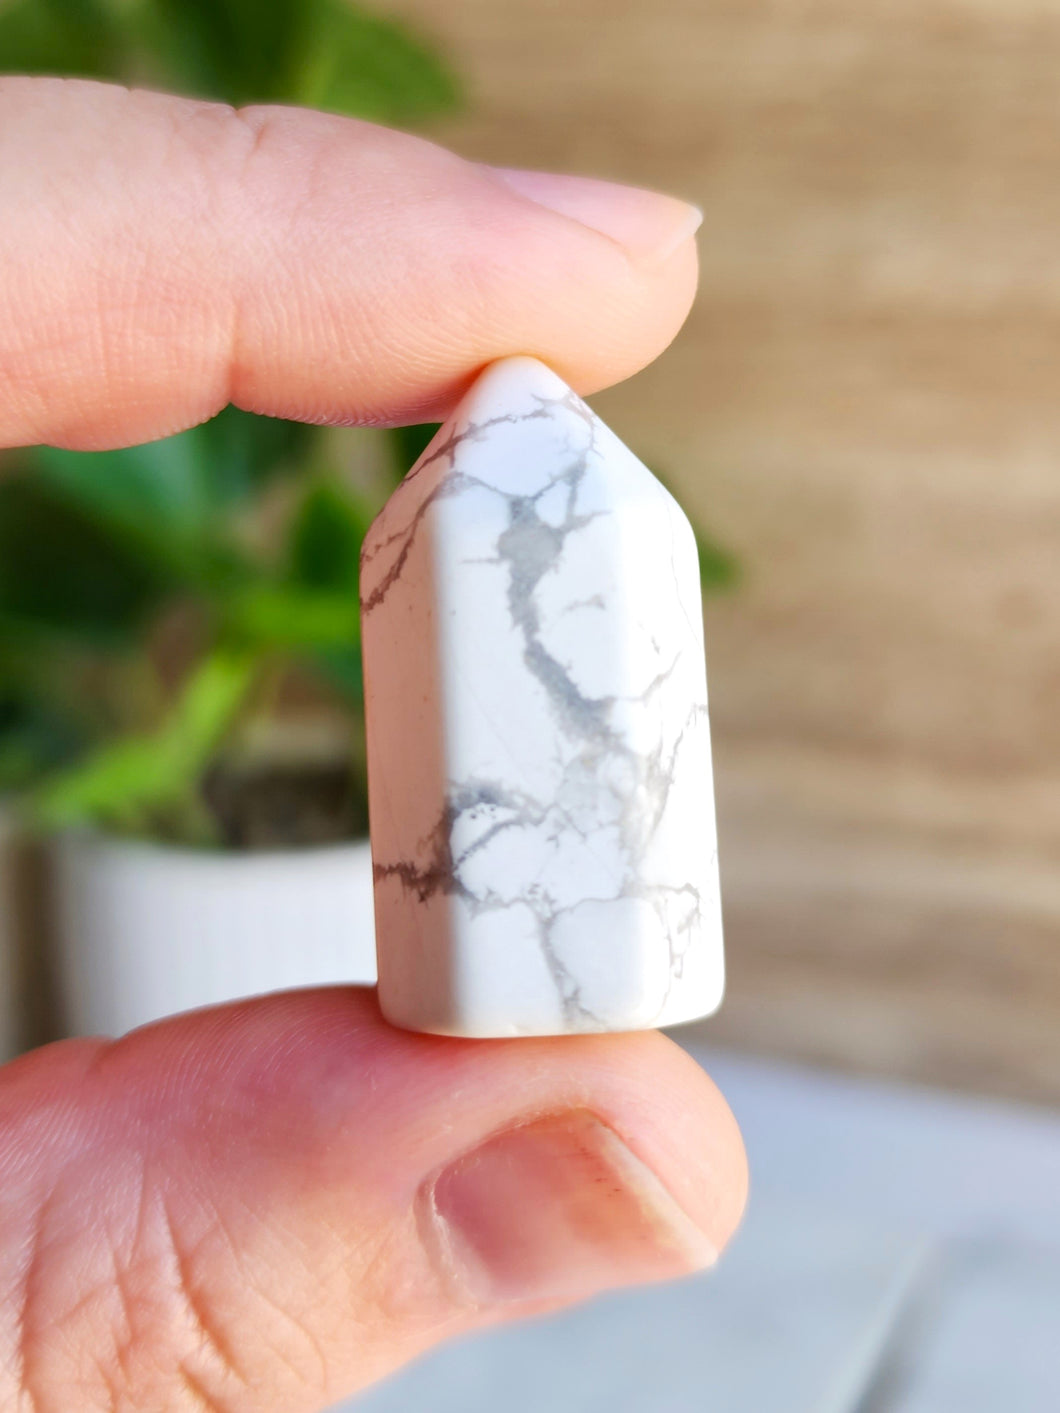 Howlite promotes patience, tranquility, and self-care. Its calming effects aid composure in challenges, fostering a serene mental state and restful sleep